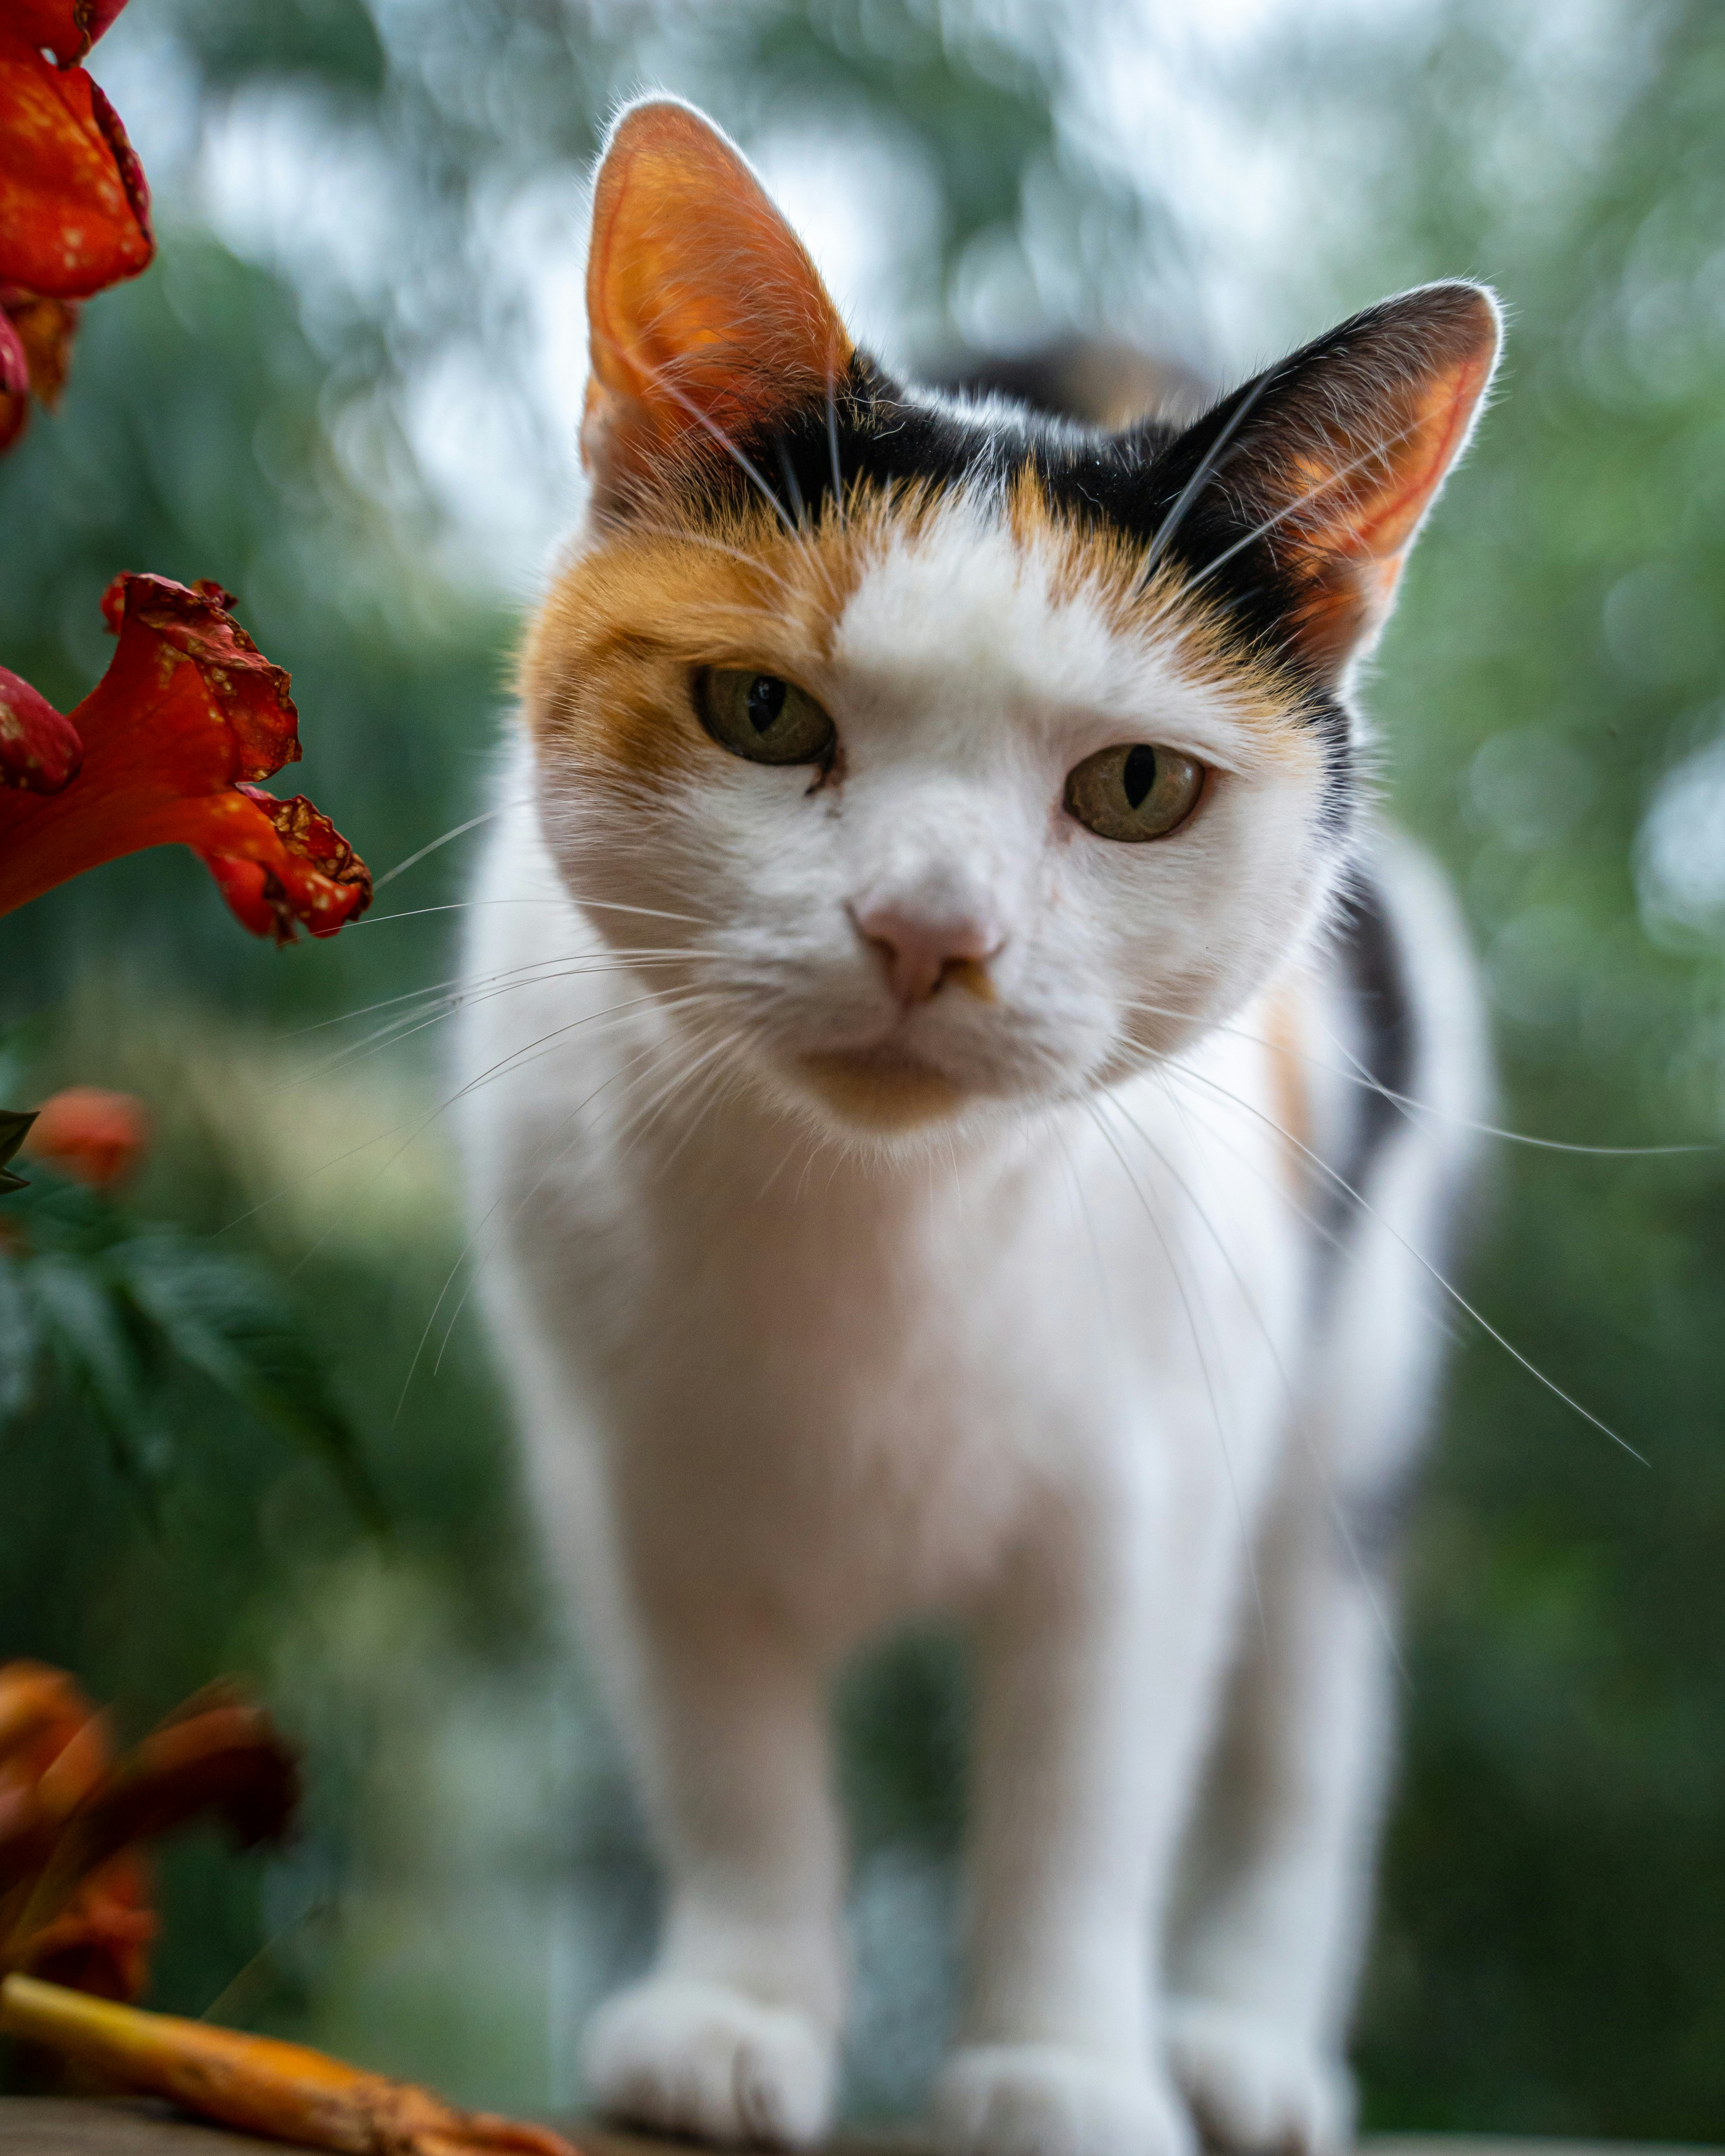 white and orange cat standing on red flower